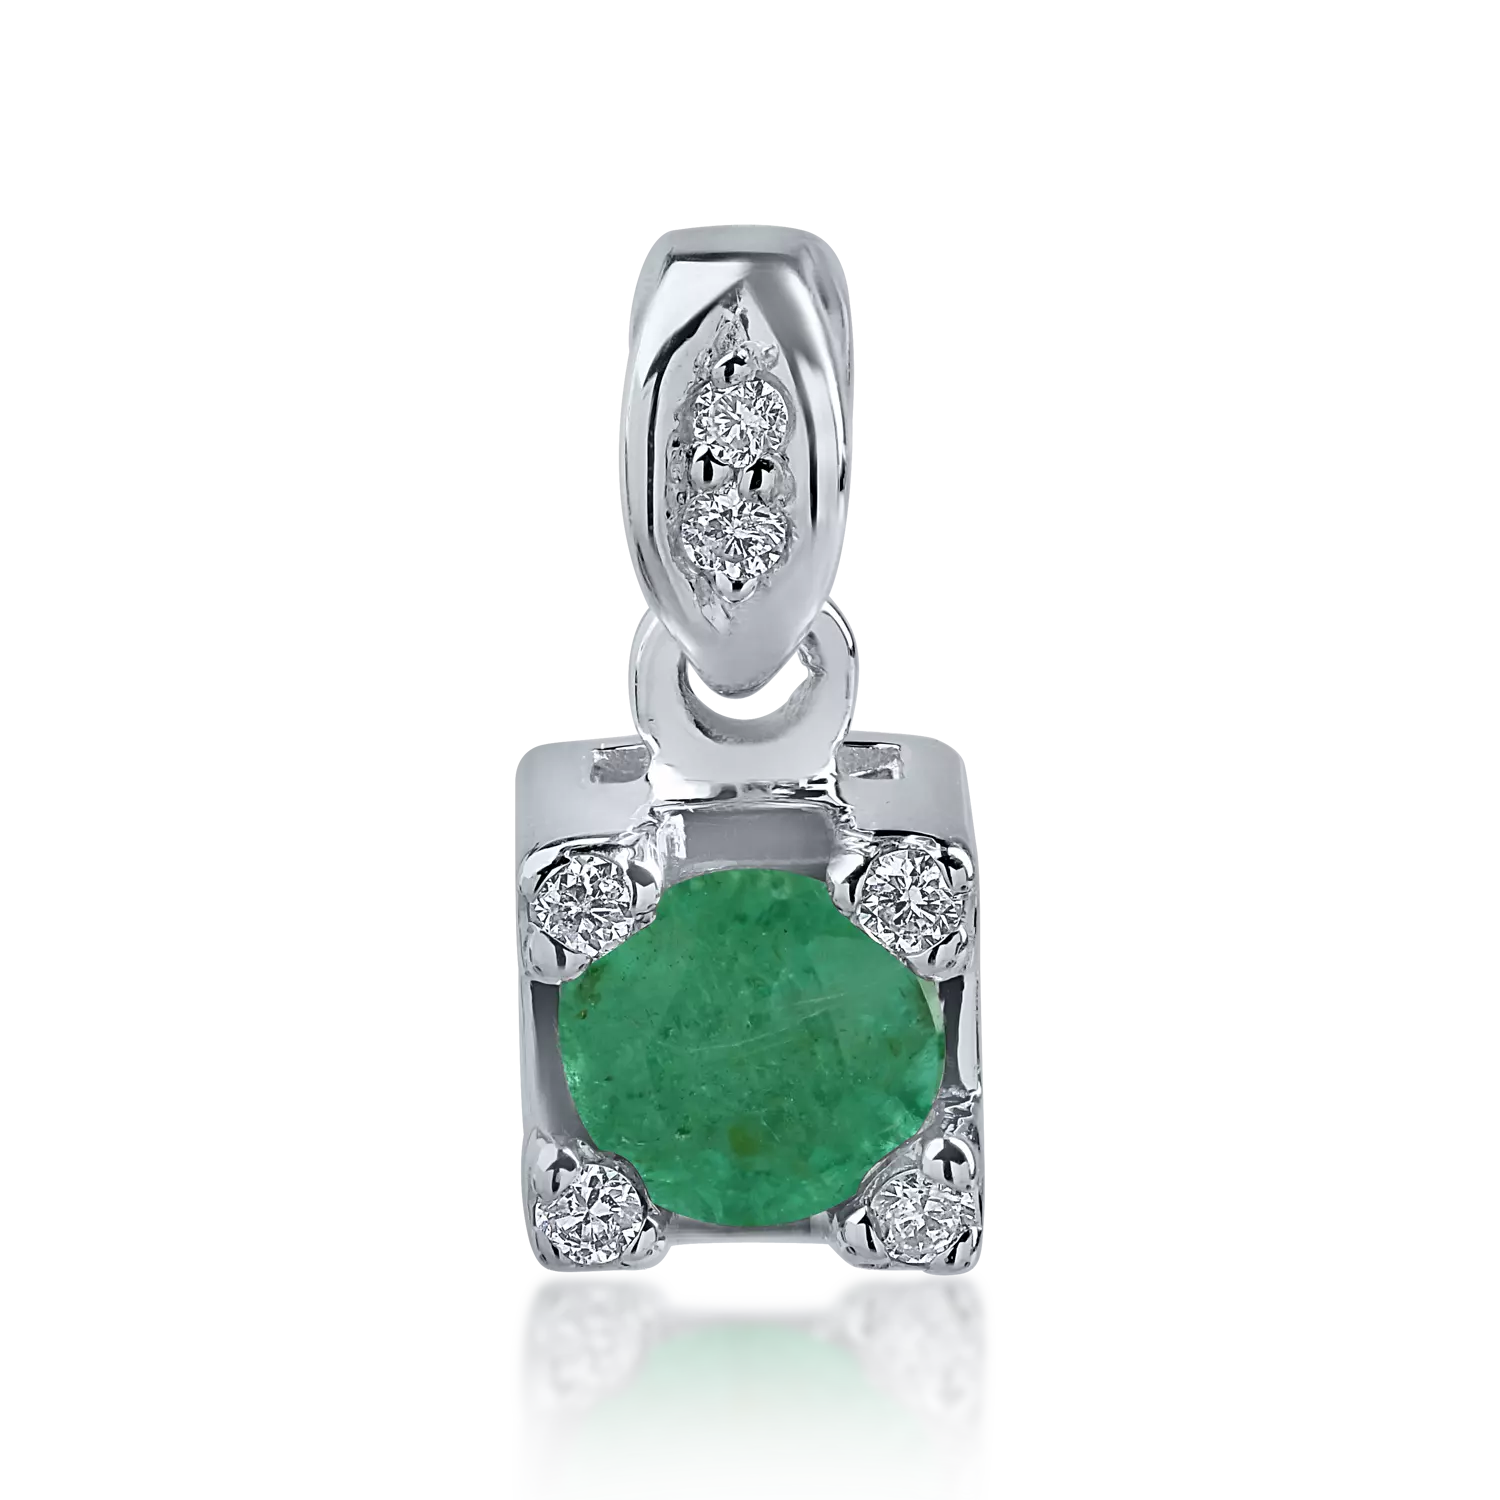 White gold pendant with 0.18ct emerald and 0.04ct diamonds